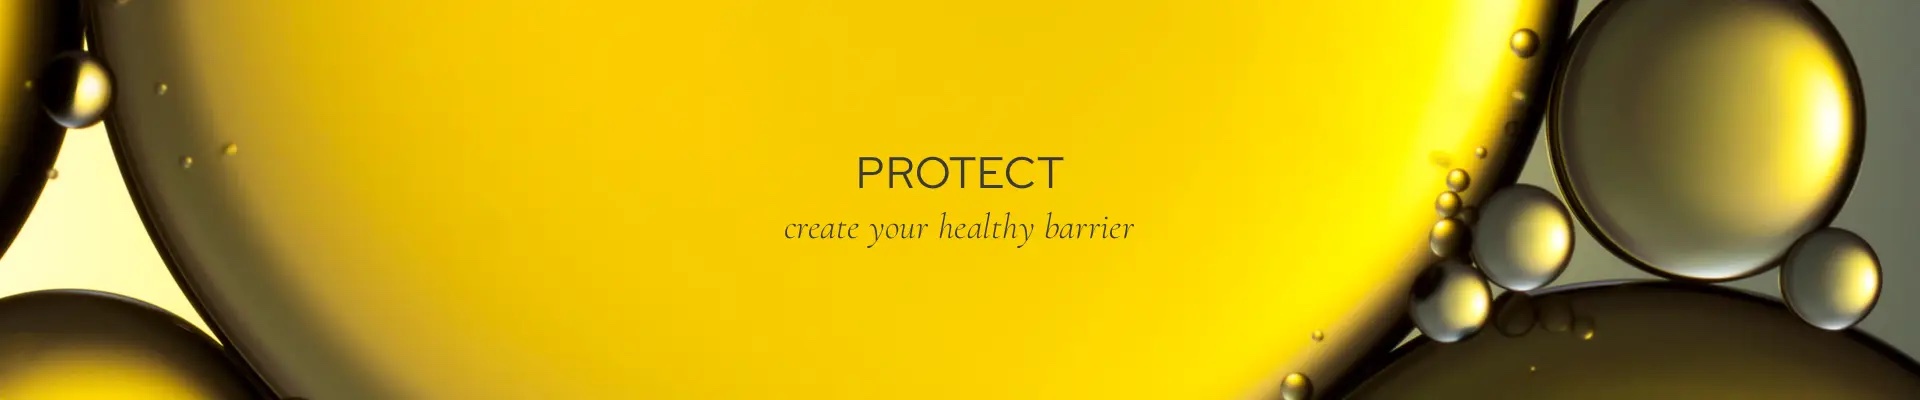 Protect - Create your healthy barrier